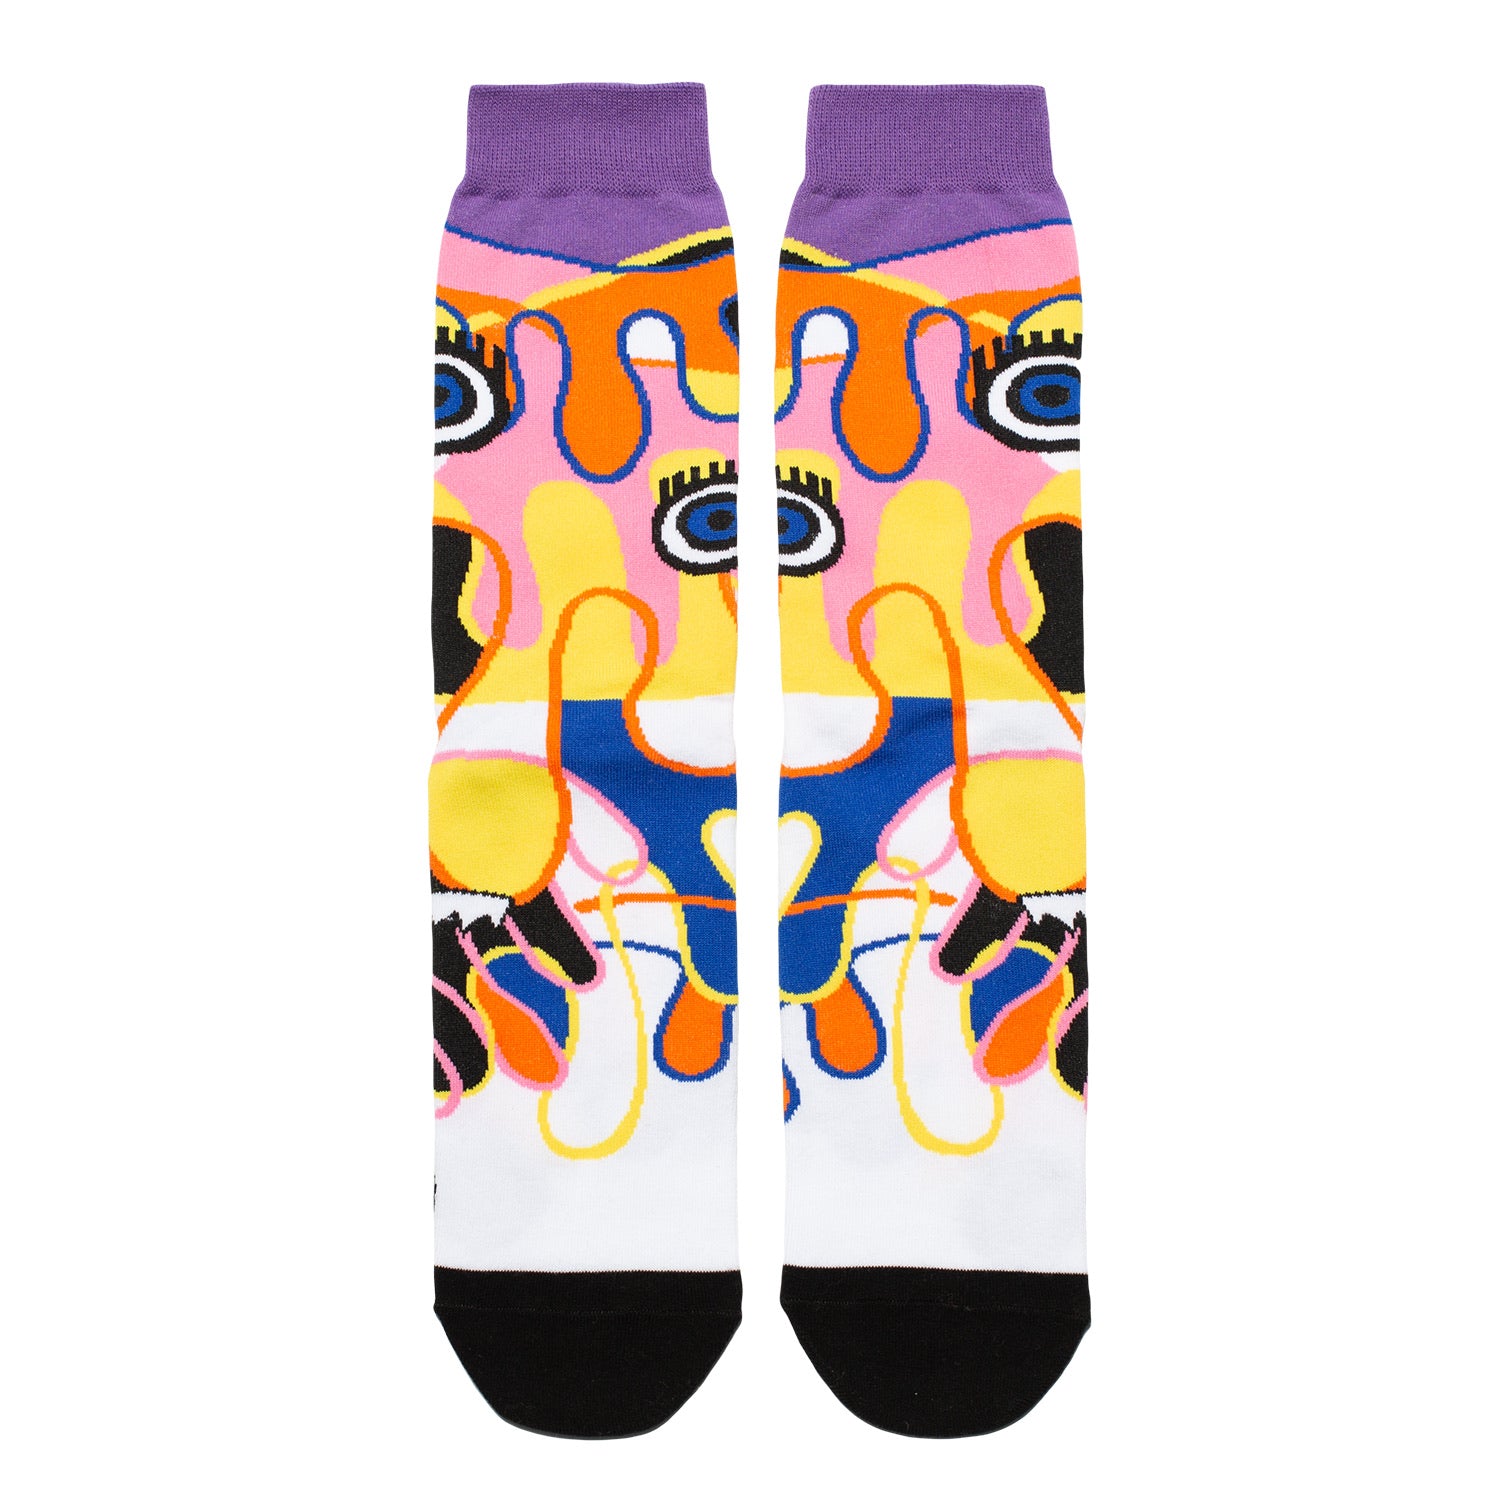 Funky Funny Socks Gift Box 3-Pack (with 3 originally designed postcards)